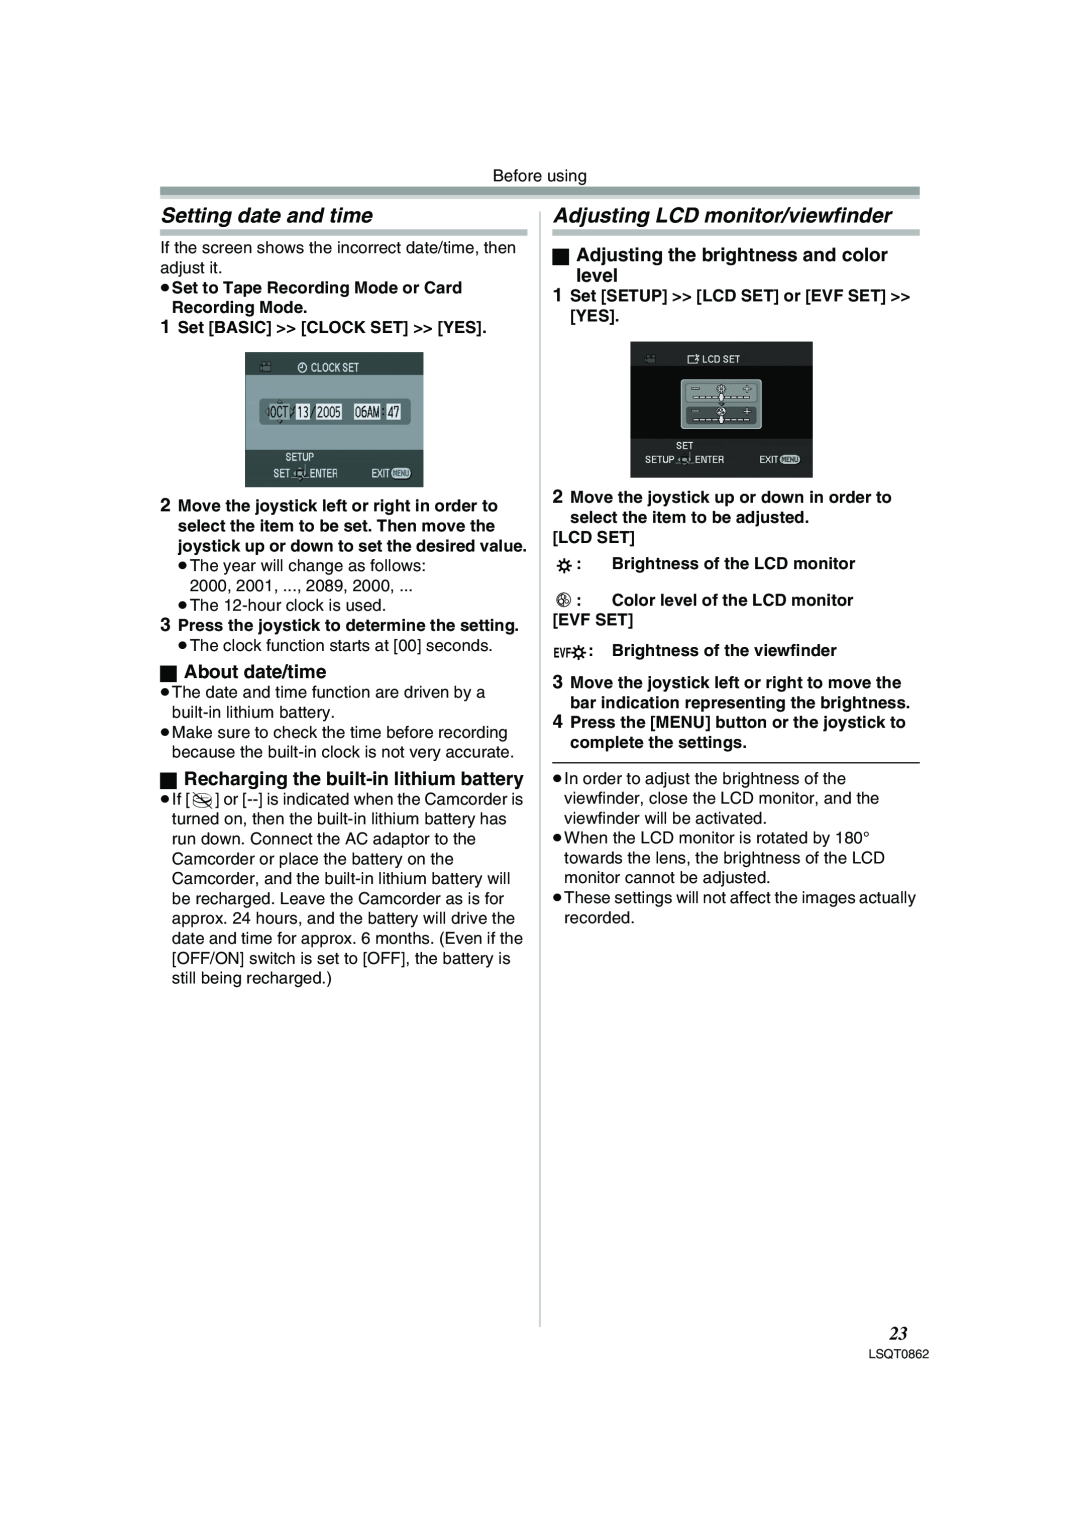 Panasonic PV-GS250 Setting date and time, Adjusting LCD monitor/viewfinder, ª About date/time, Set BASIC CLOCK SET YES 